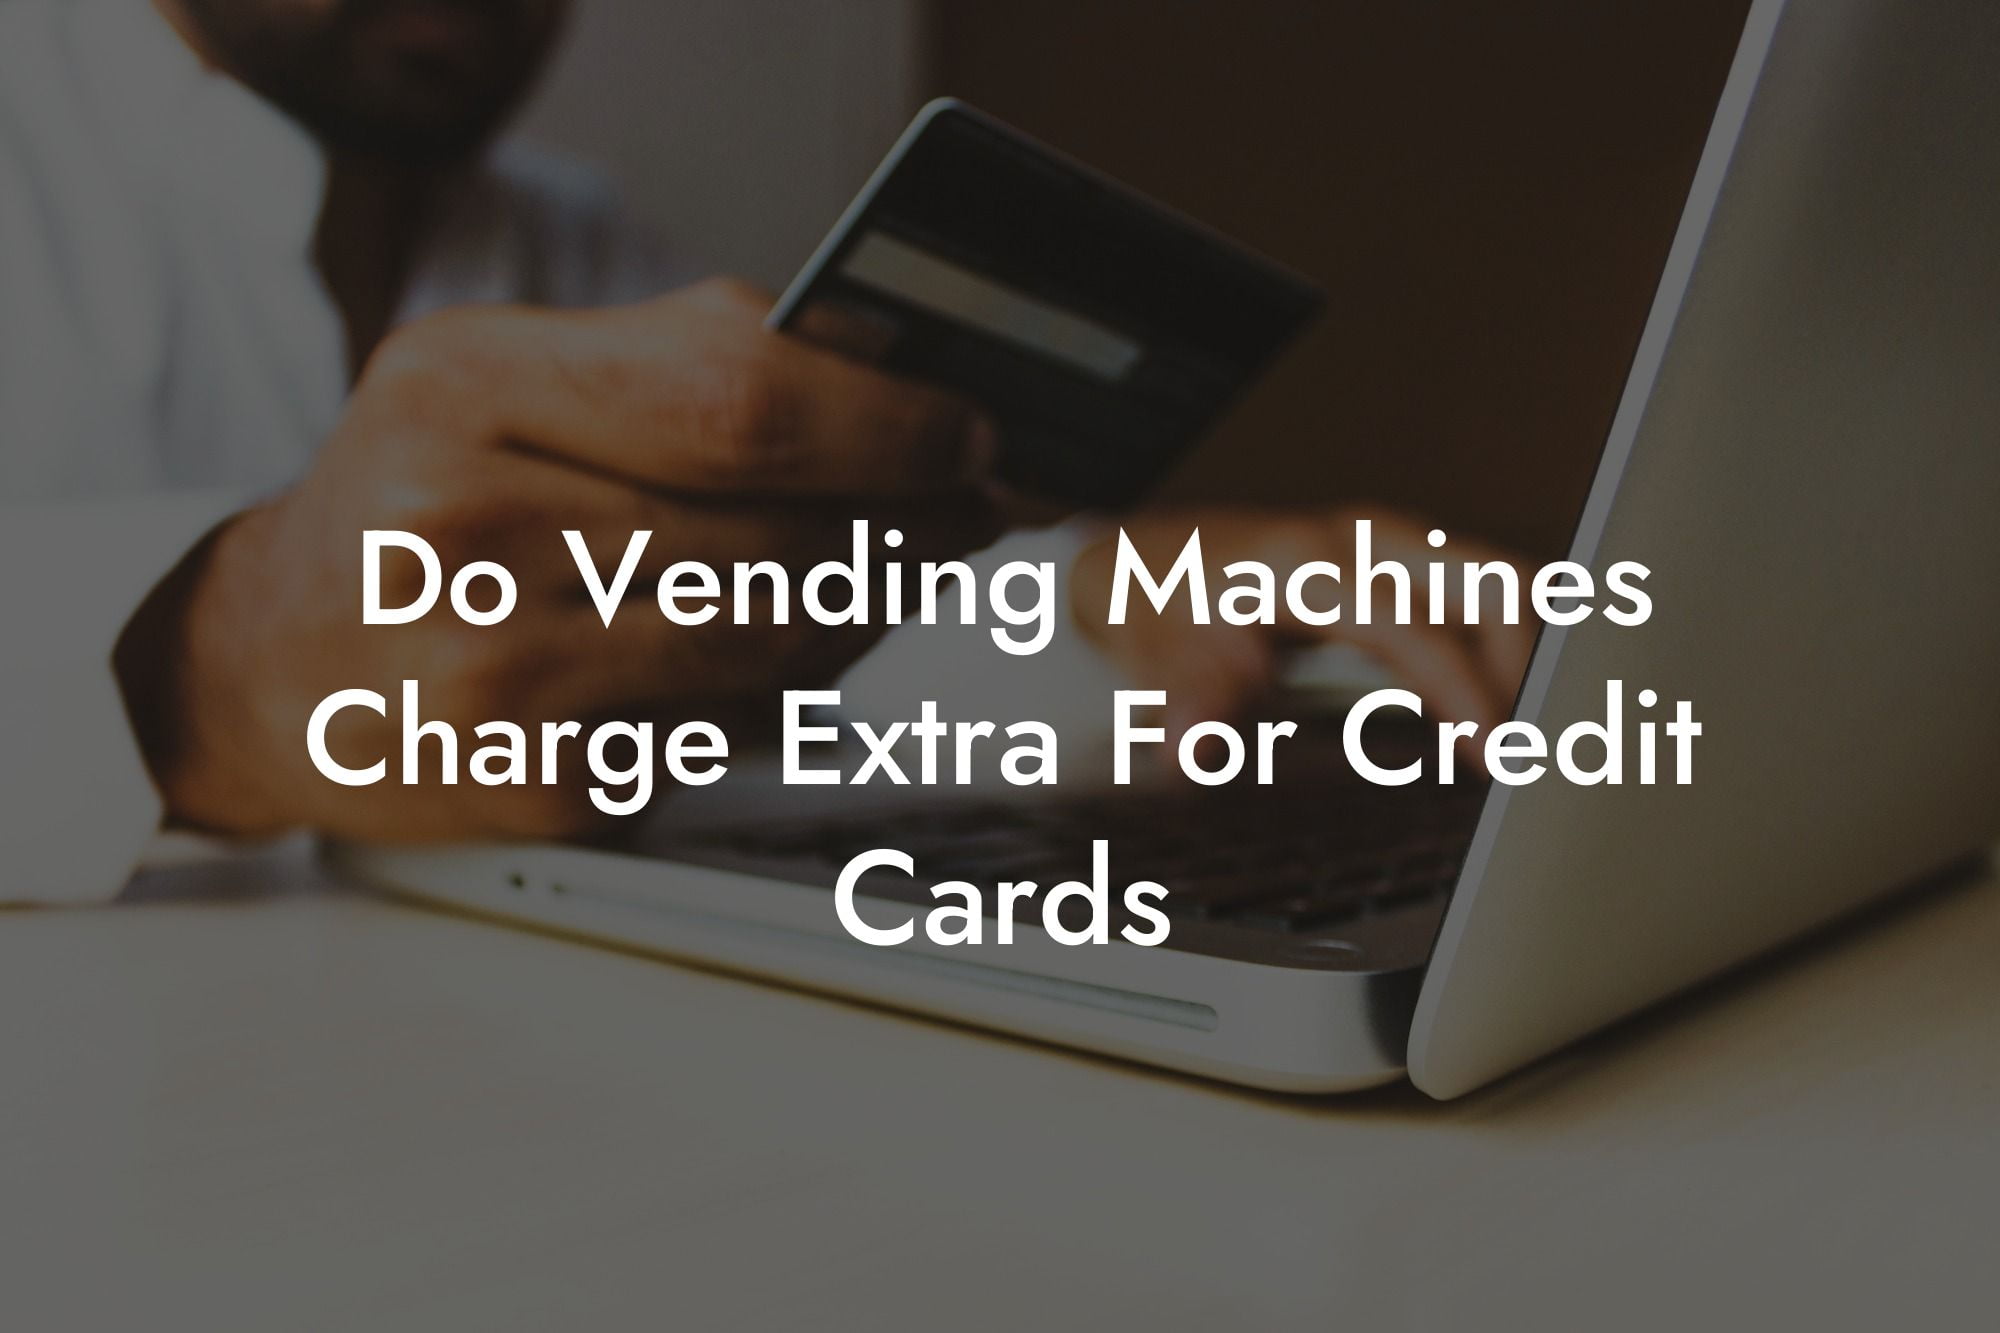 Do Vending Machines Charge Extra For Credit Cards